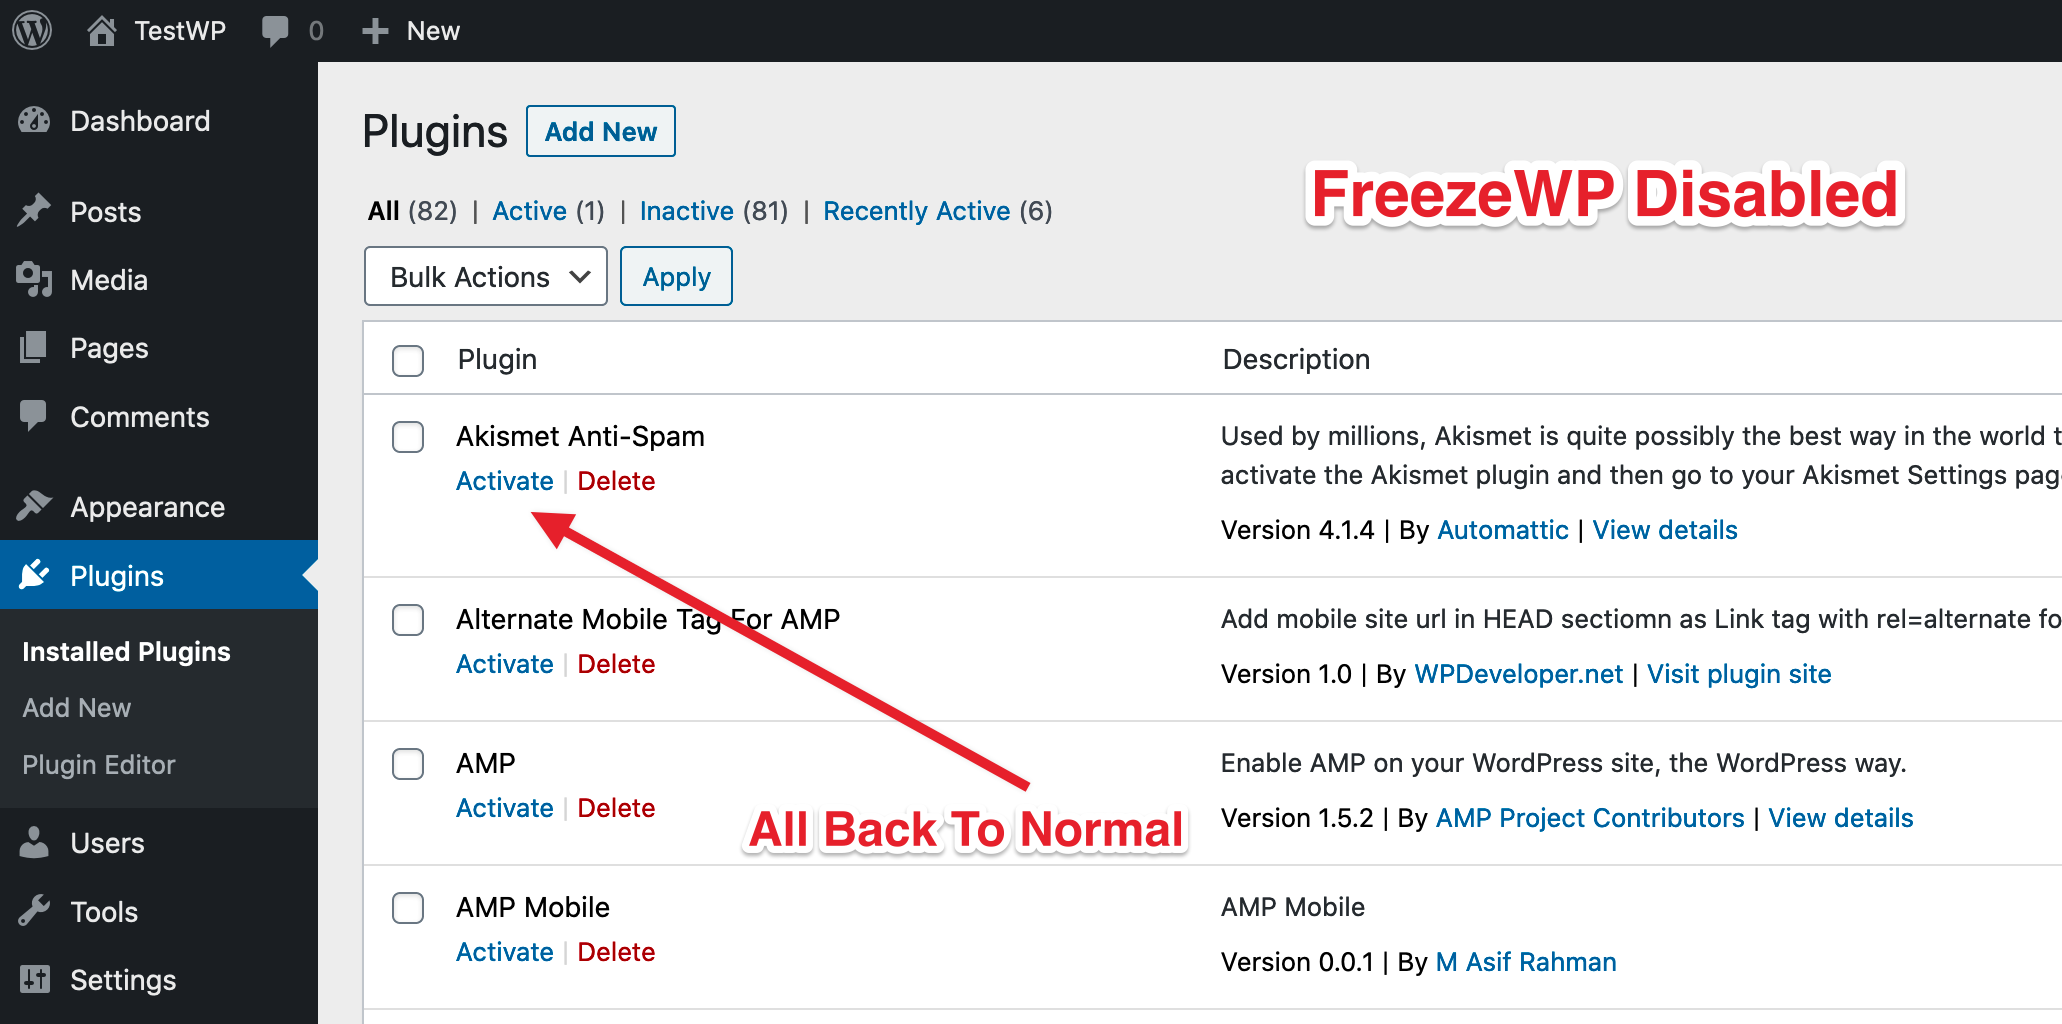 FreeZWP(Plugin) Disable - All Back To Normal